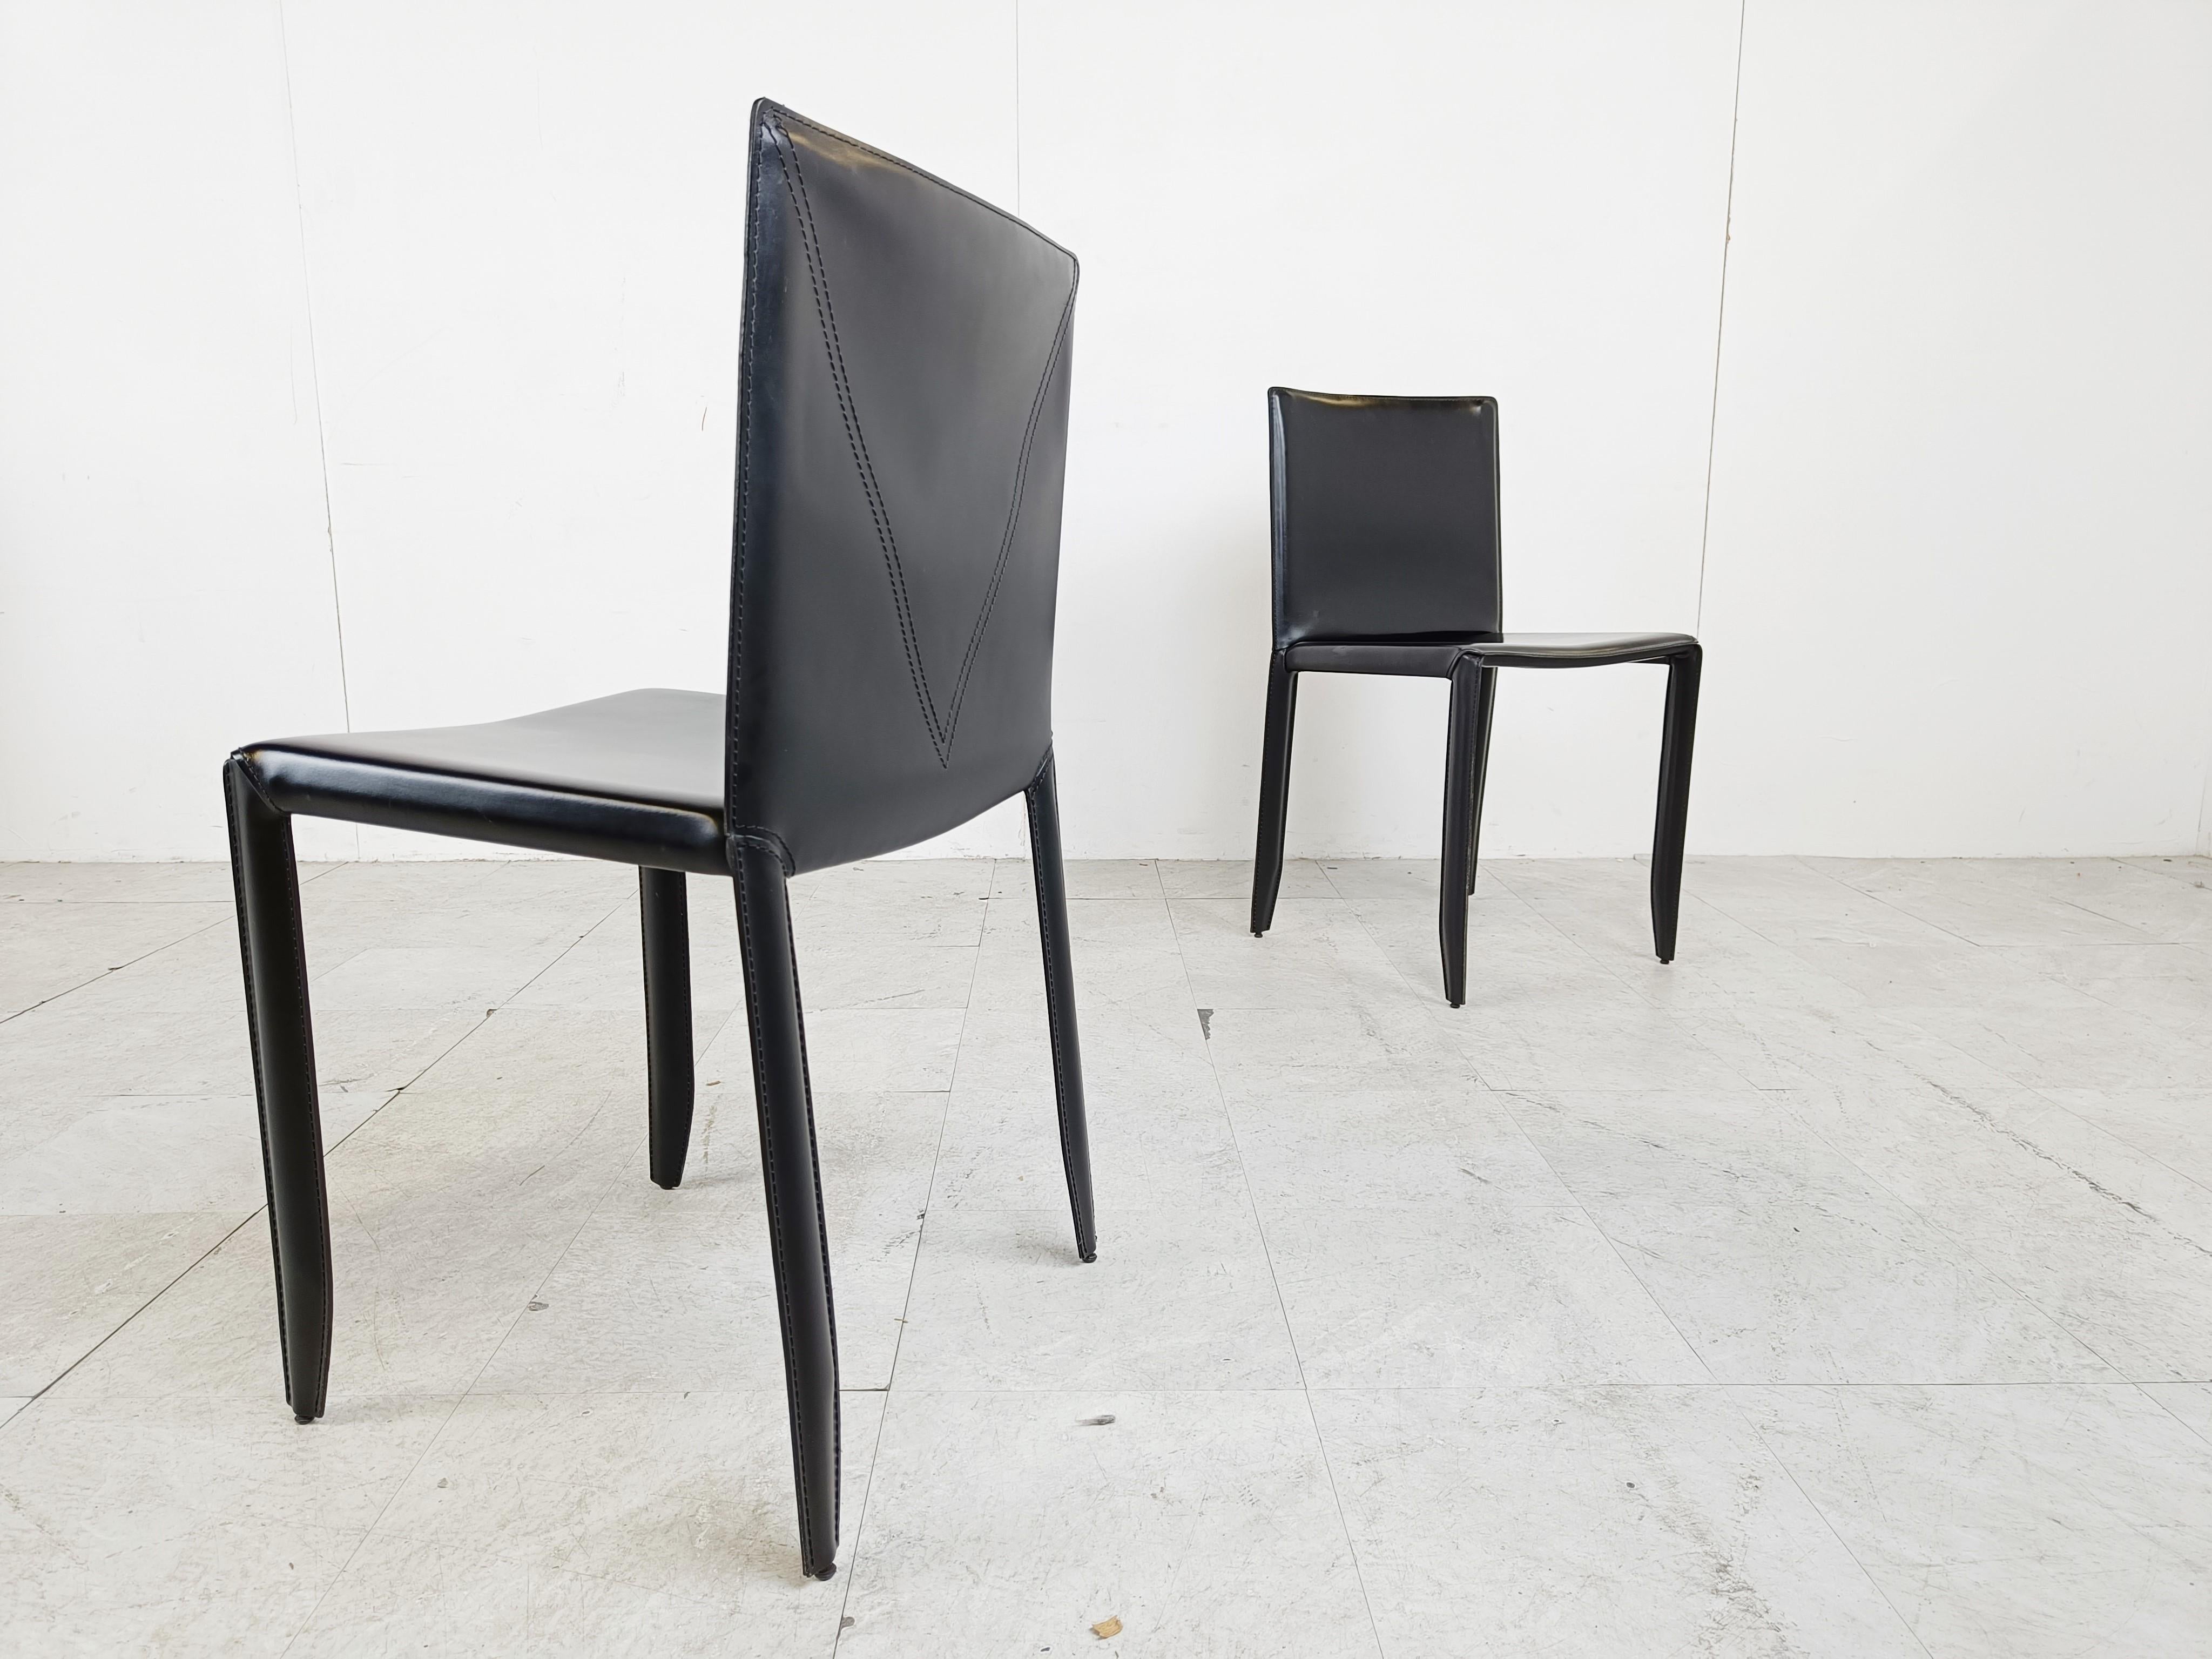 Black Leather Dining Chairs by Cattelan Italy, Set of 6 - 1980s For Sale 4